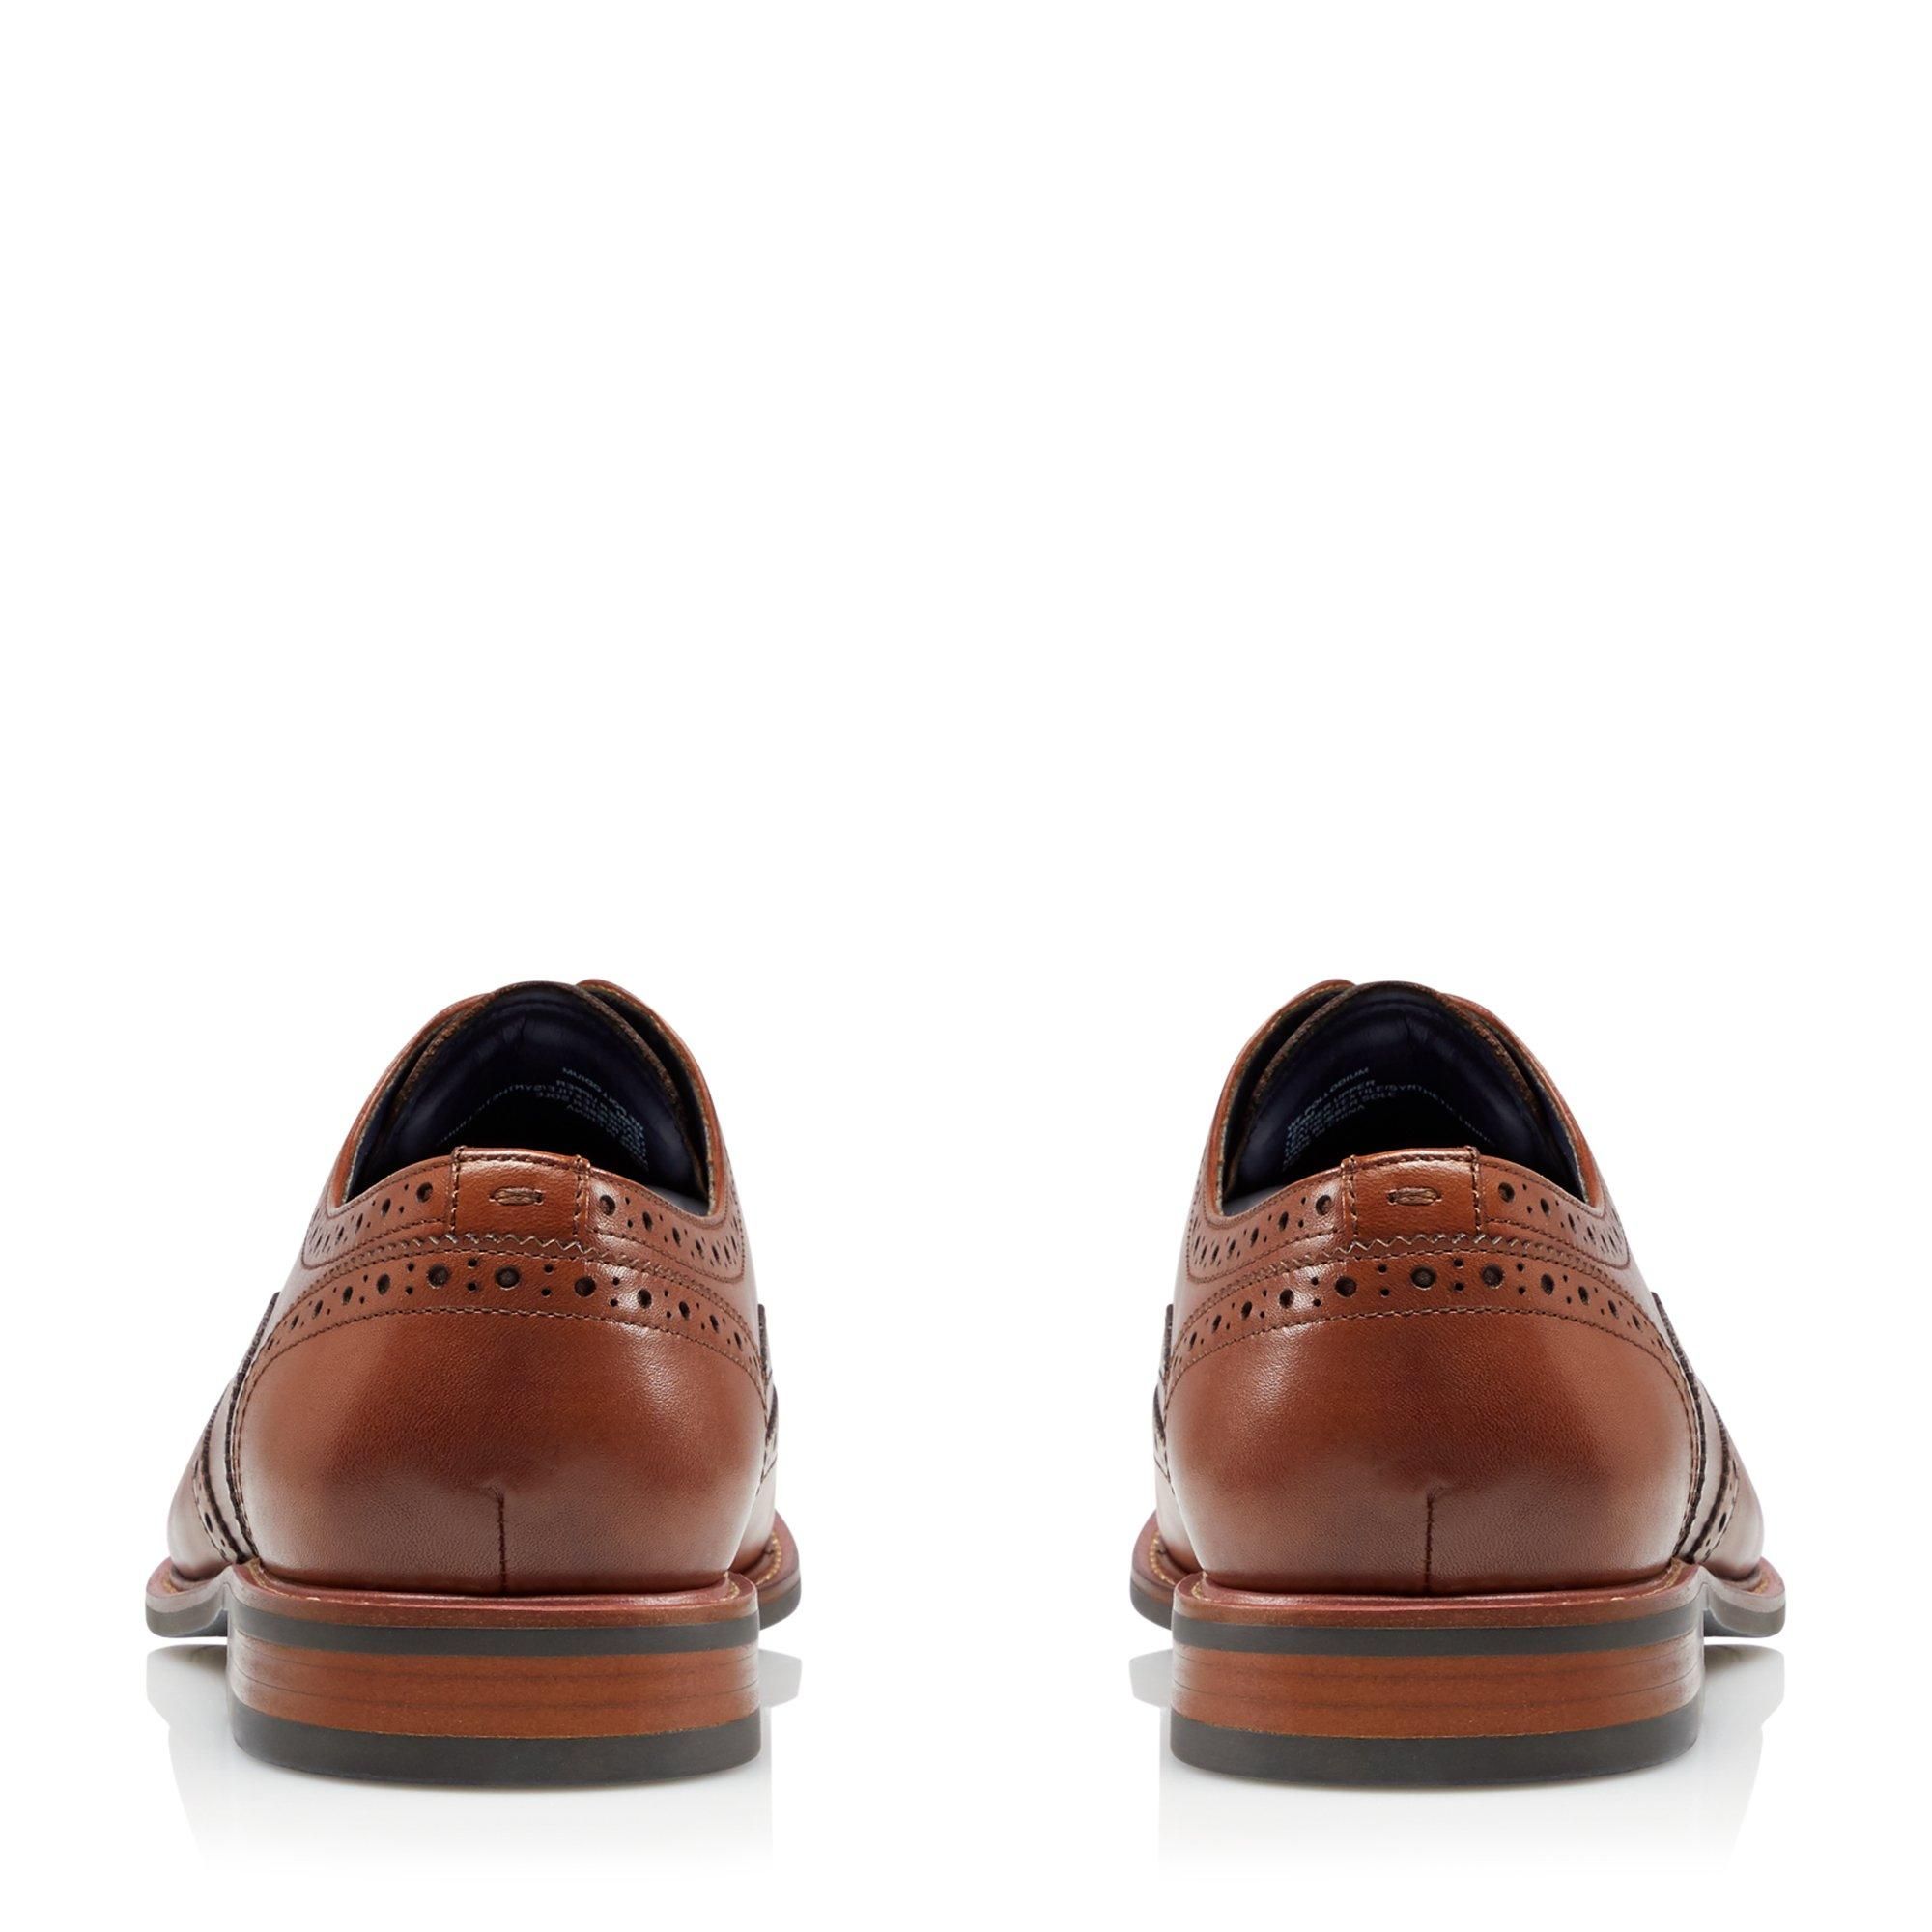 Upgrade your formal look with the wide fit Pollodium shoe. Showcasing a striped sole, round toe and secure lace closure. It's complete with traditional brogue punching and wingtip details.